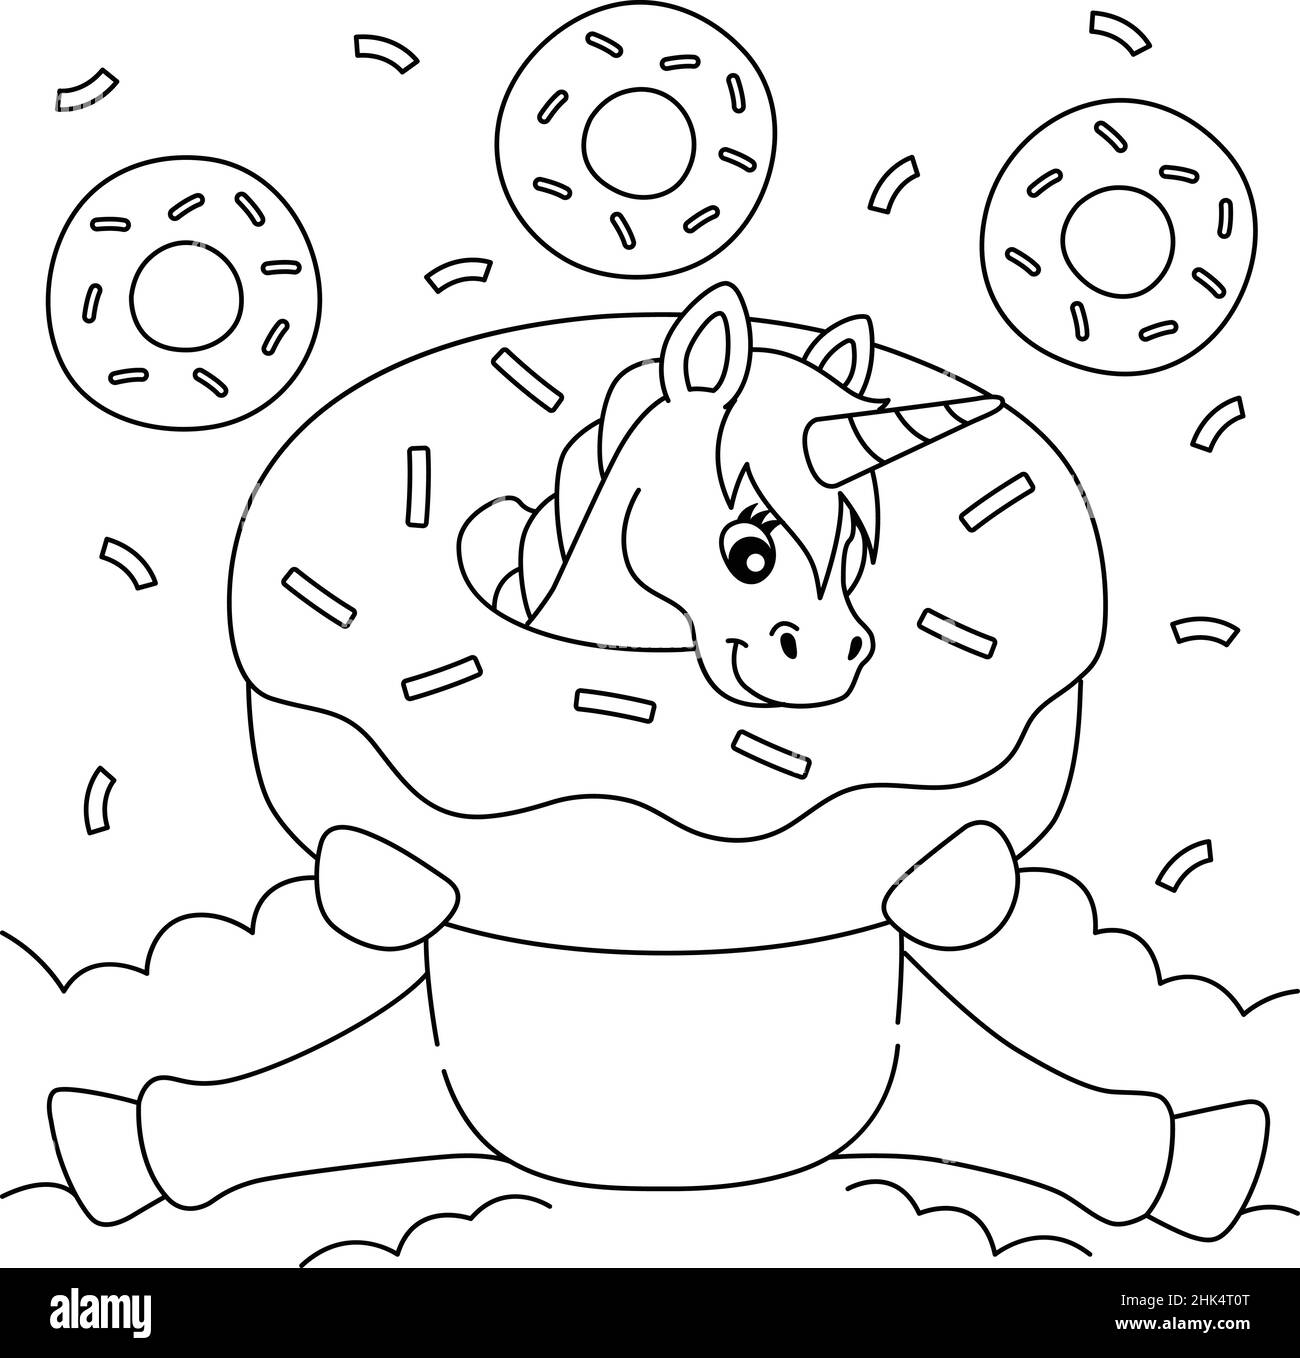 Coloring Page Unicorn High Resolution Stock Photography and Images ...